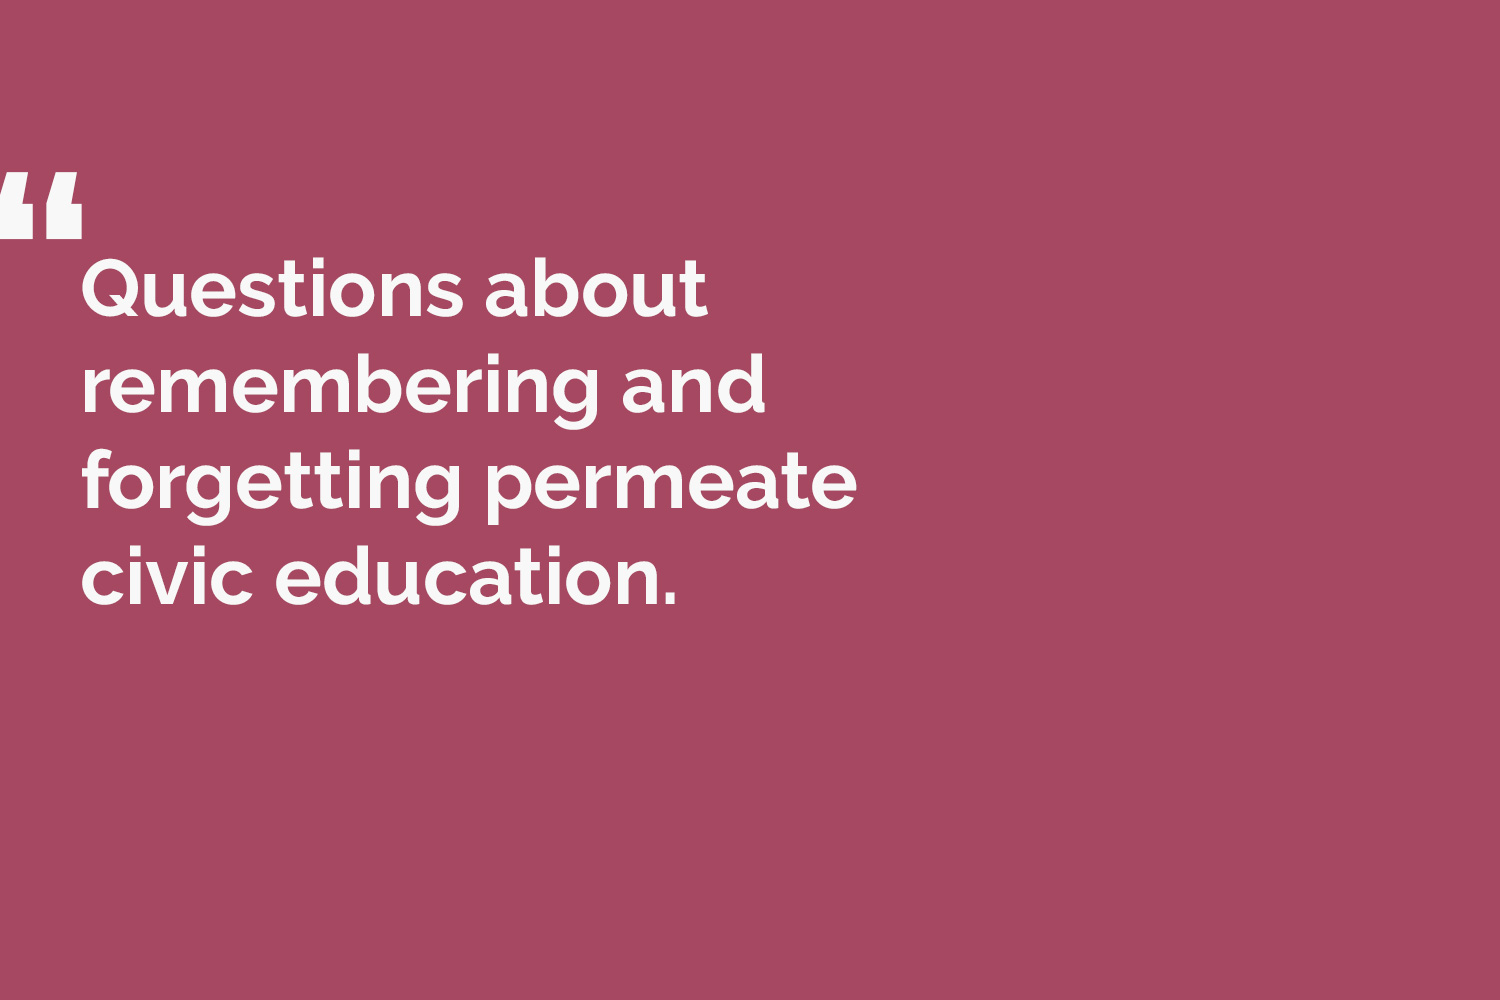 quote card reads: Questions about remembering and forgetting permeate civic education.